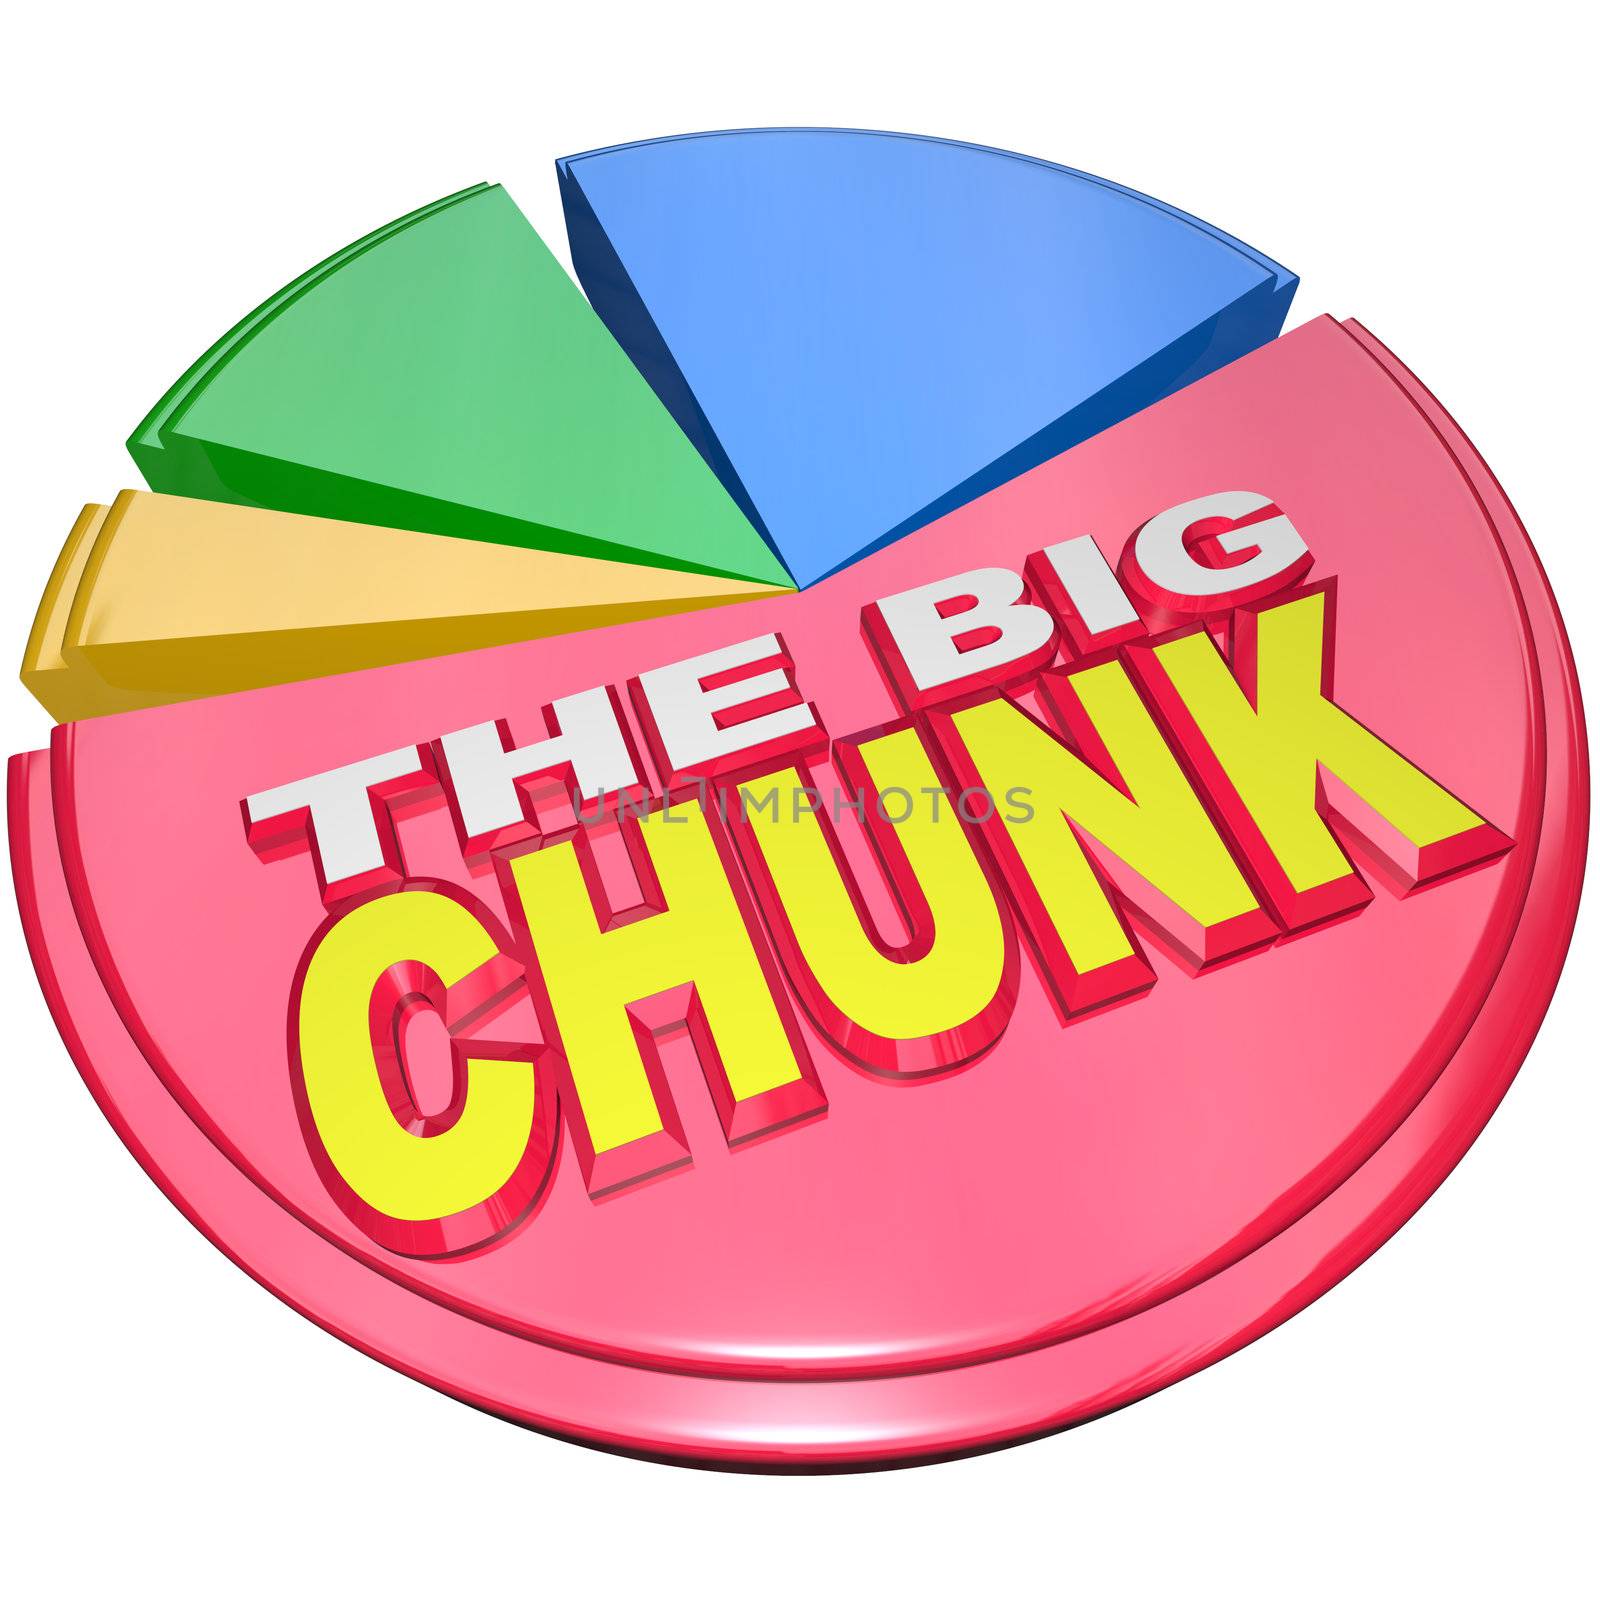 The Big Chunk - Largest Portion of Pie Chart Share by iQoncept